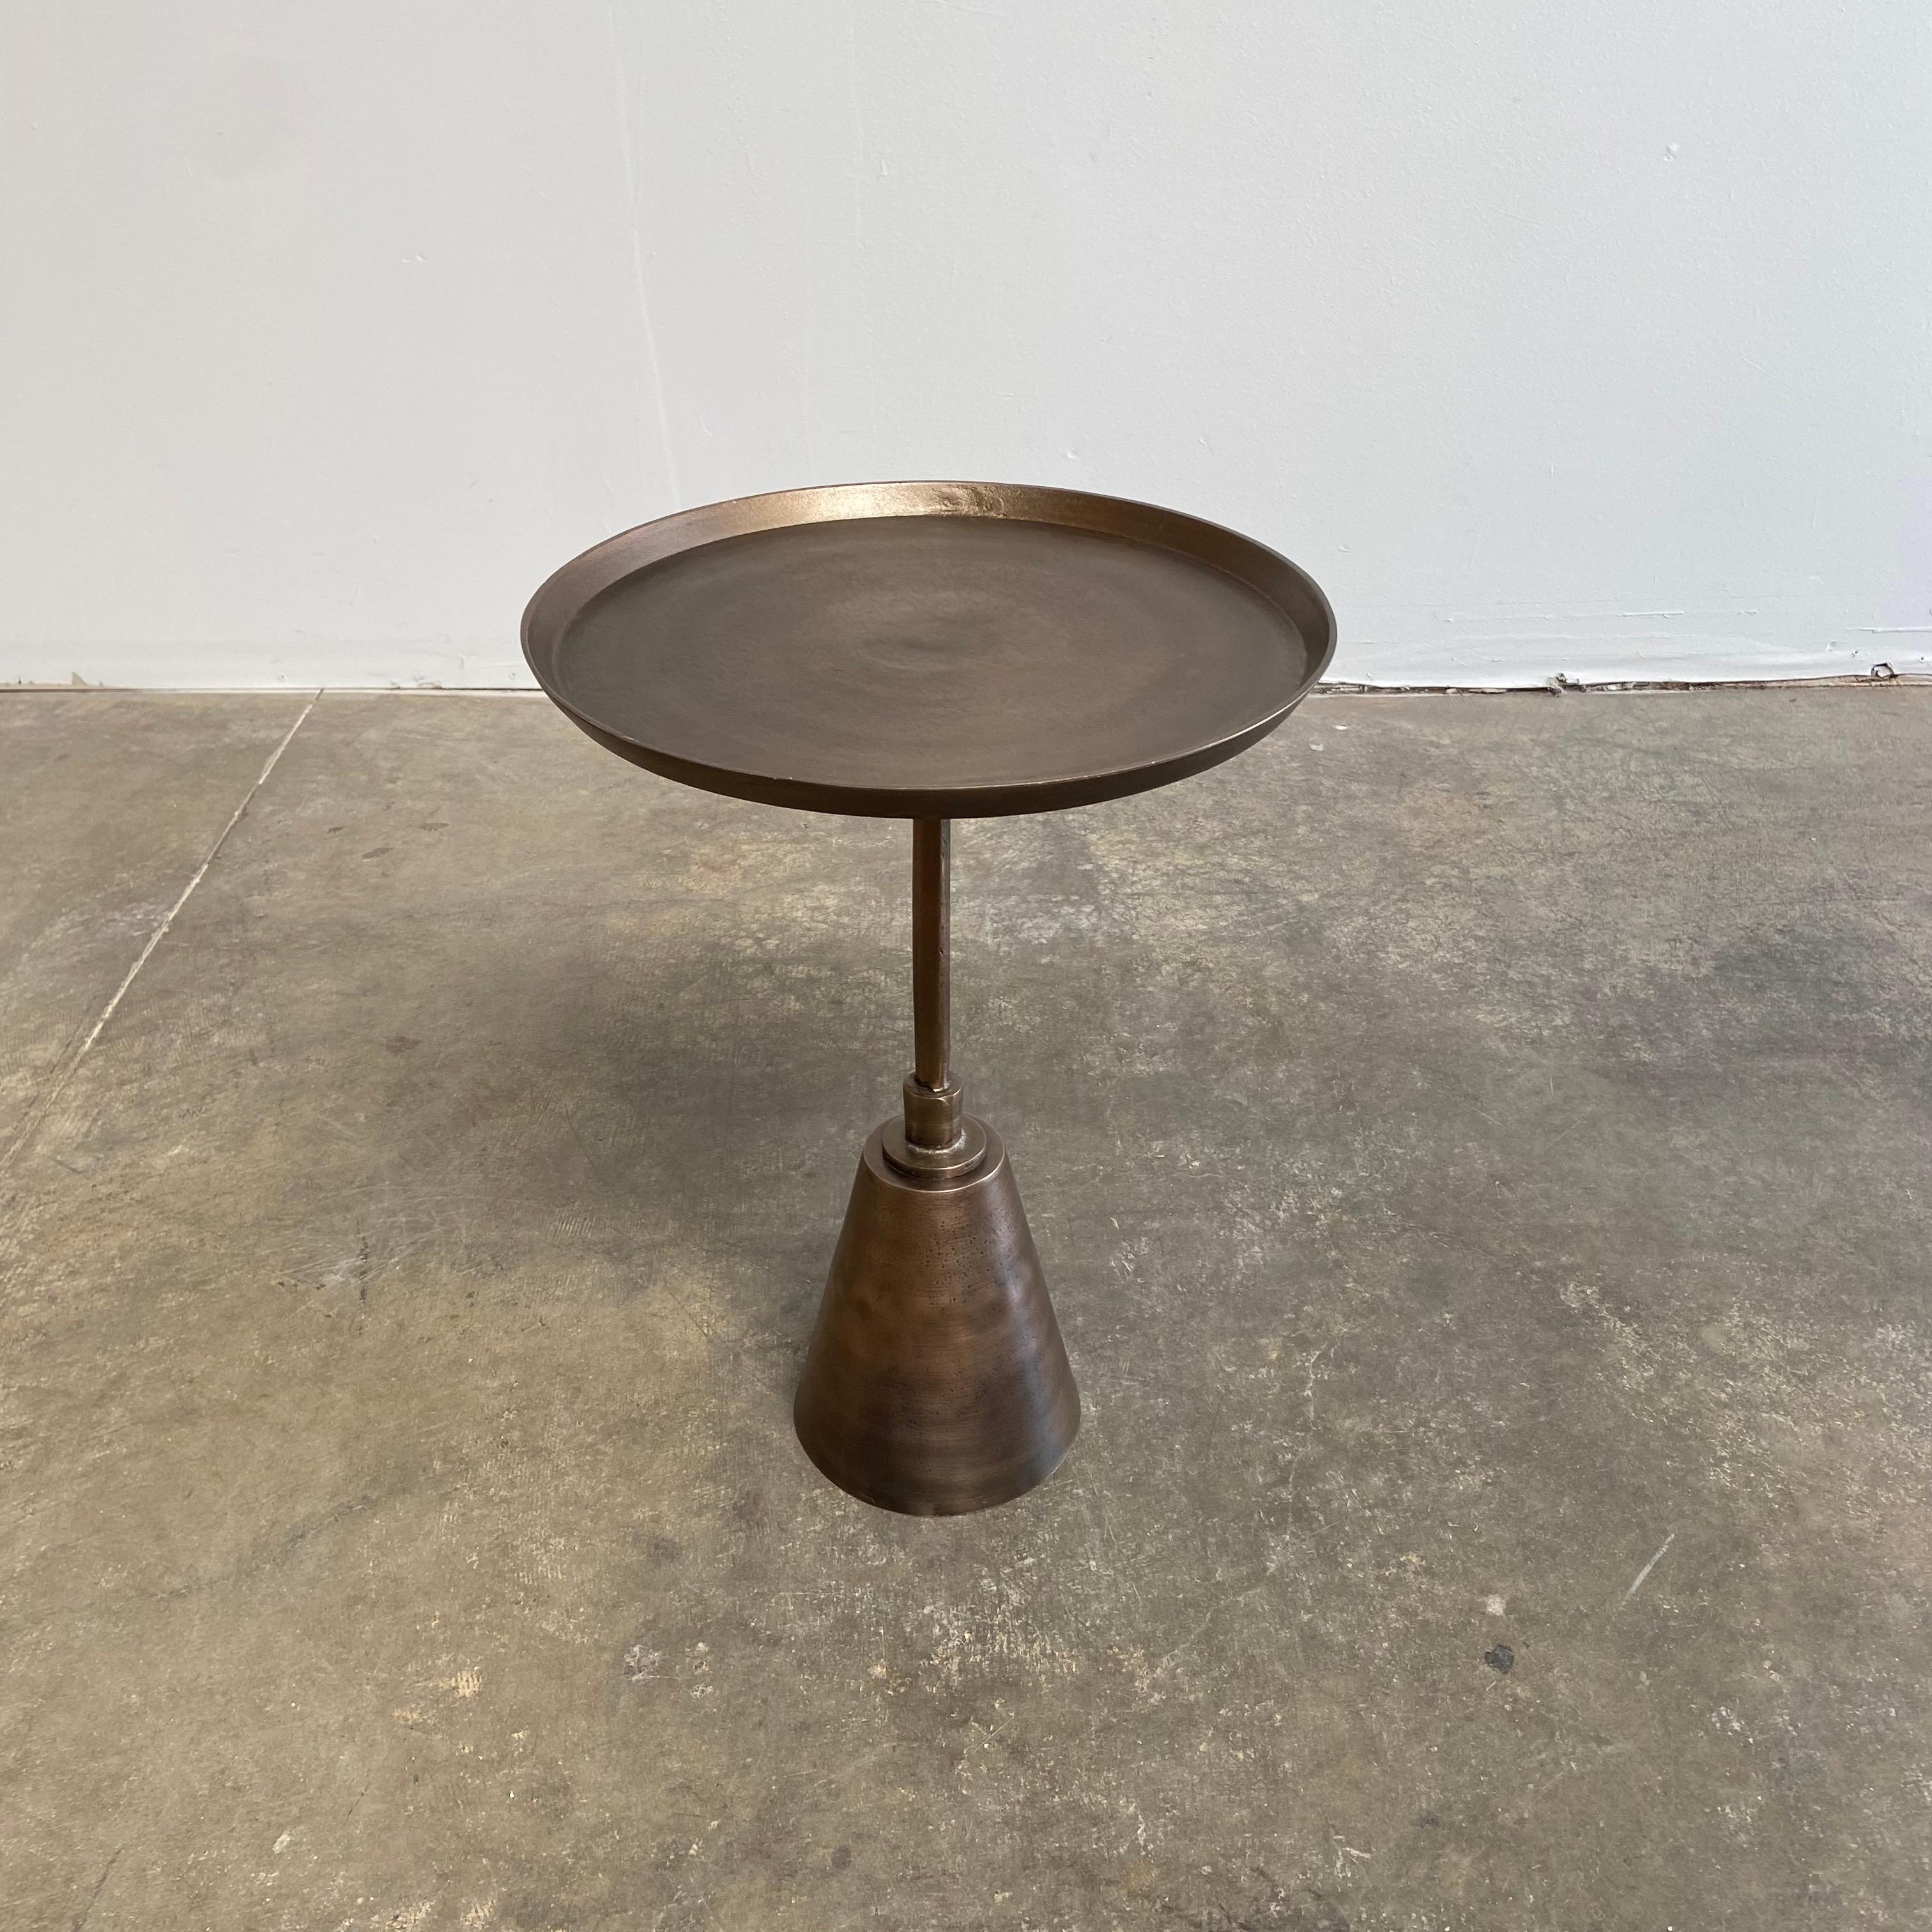 Small side table 16” RD. X 22” H.
Finish is in an antique aged brass color, very sturdy, ready to use as a side table, drink table or anywhere in the home. Please contact for lead times.
 